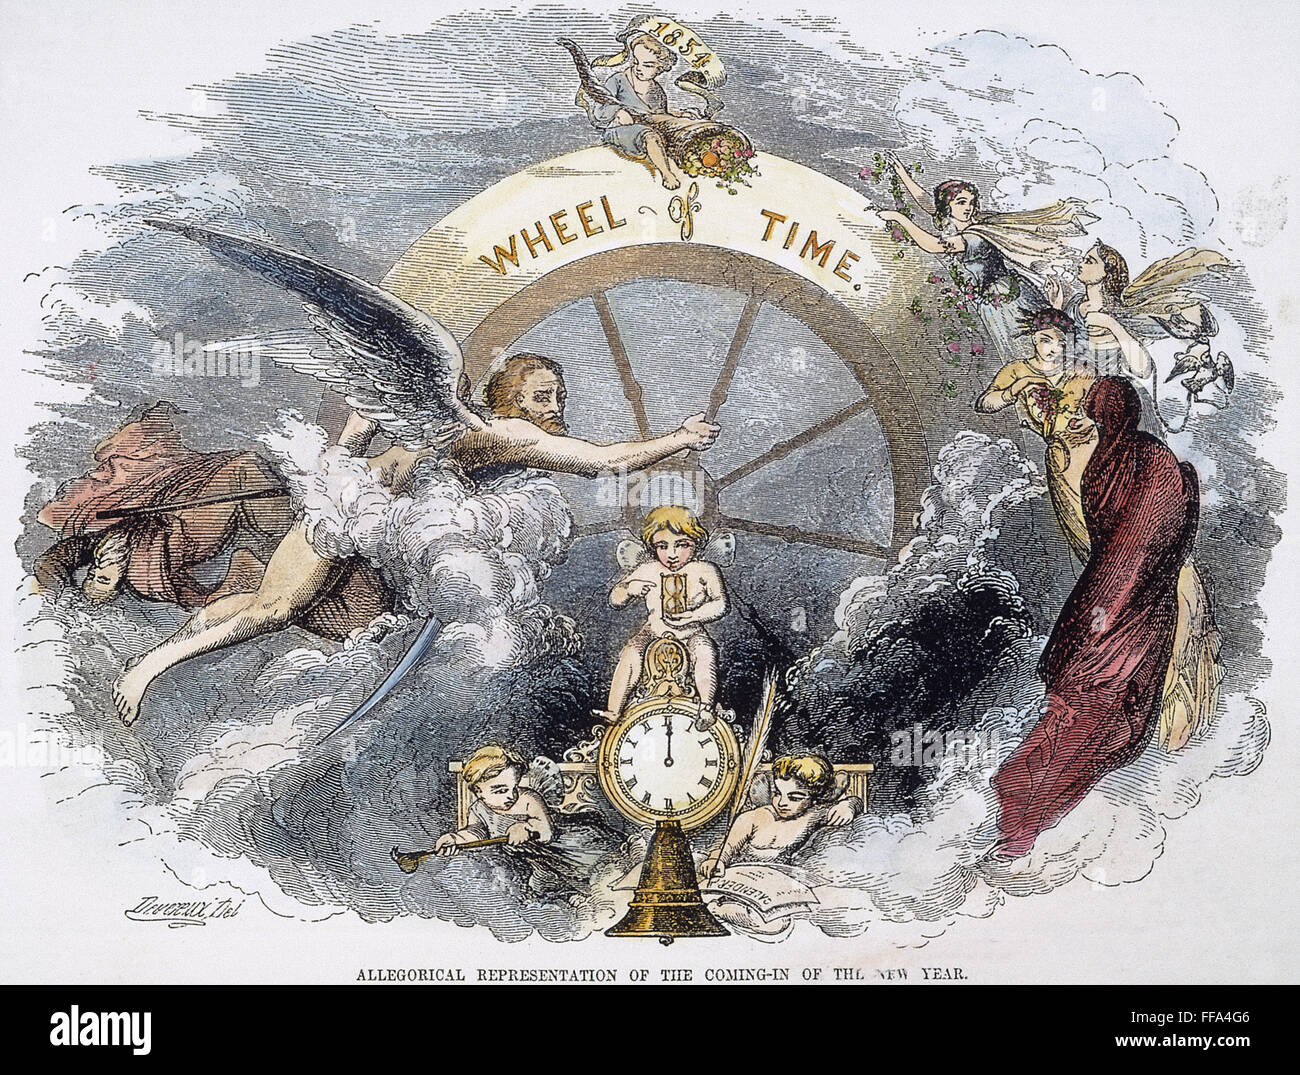 NEW YEAR, 1854. /n'Wheel of Time.' An allegorical representation of the coming-in of the New Year, 1854. Wood engraving, American, 1854. Stock Photo